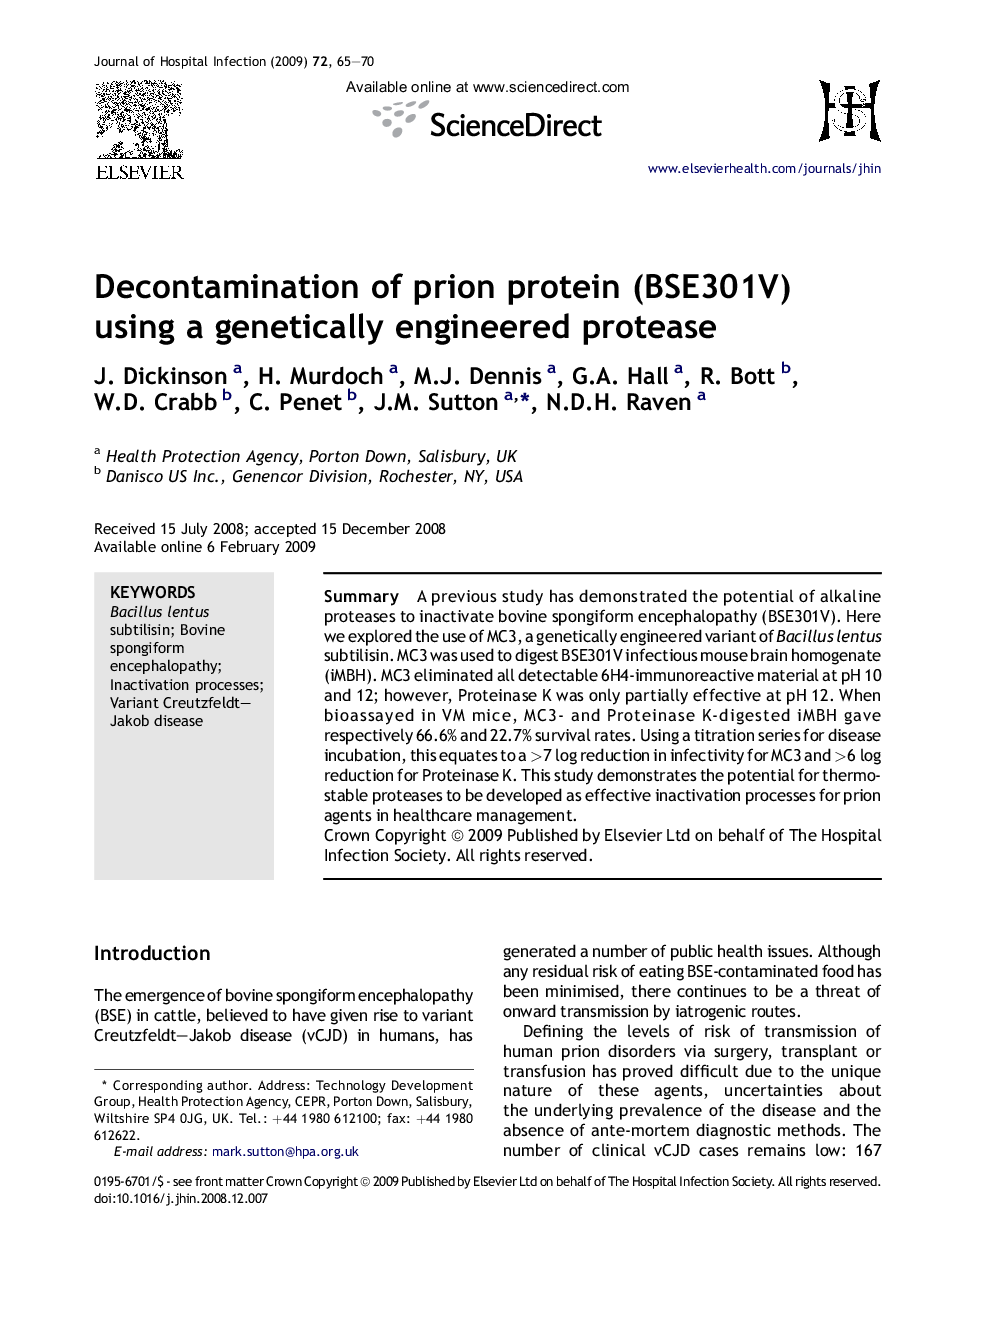 Decontamination of prion protein (BSE301V) using a genetically engineered protease